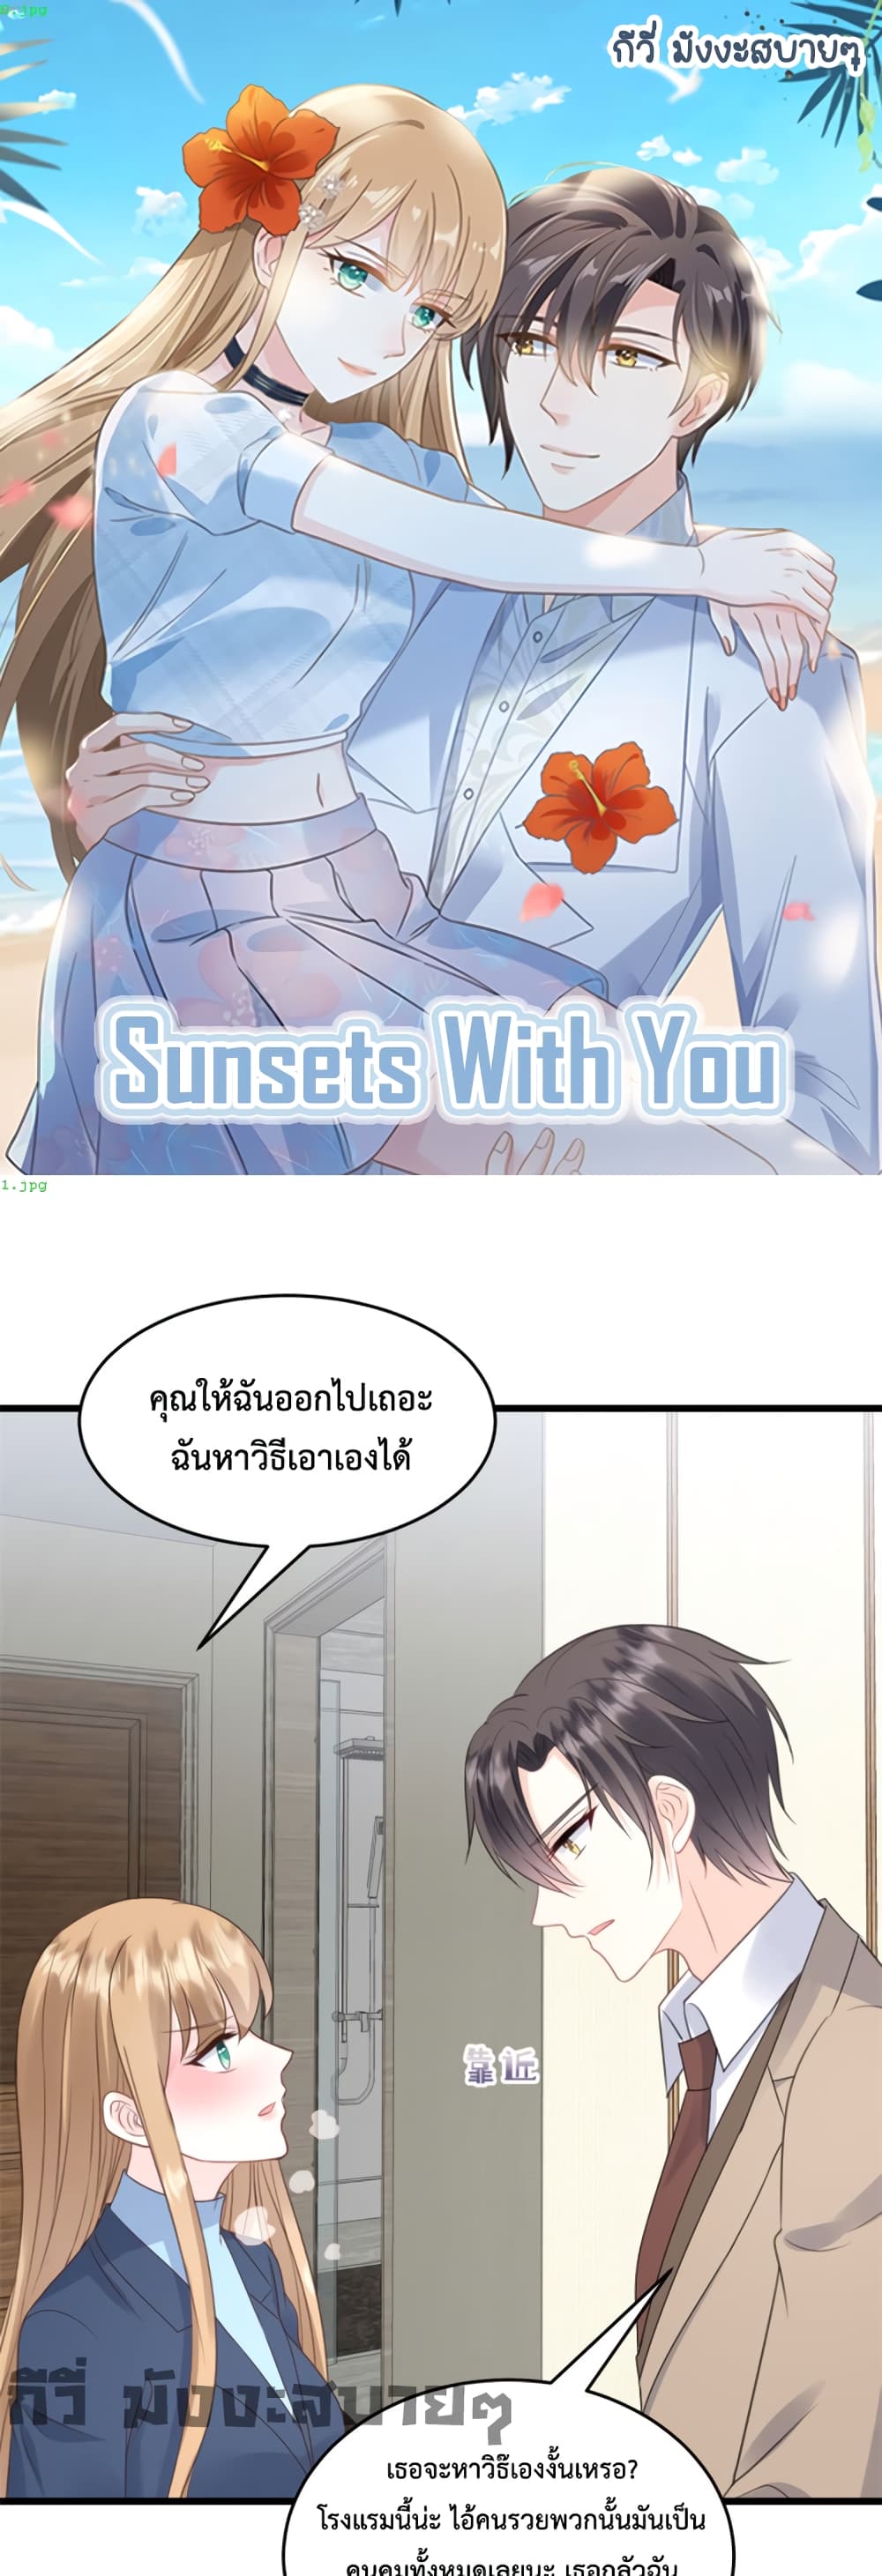 Sunsets With You 16 01